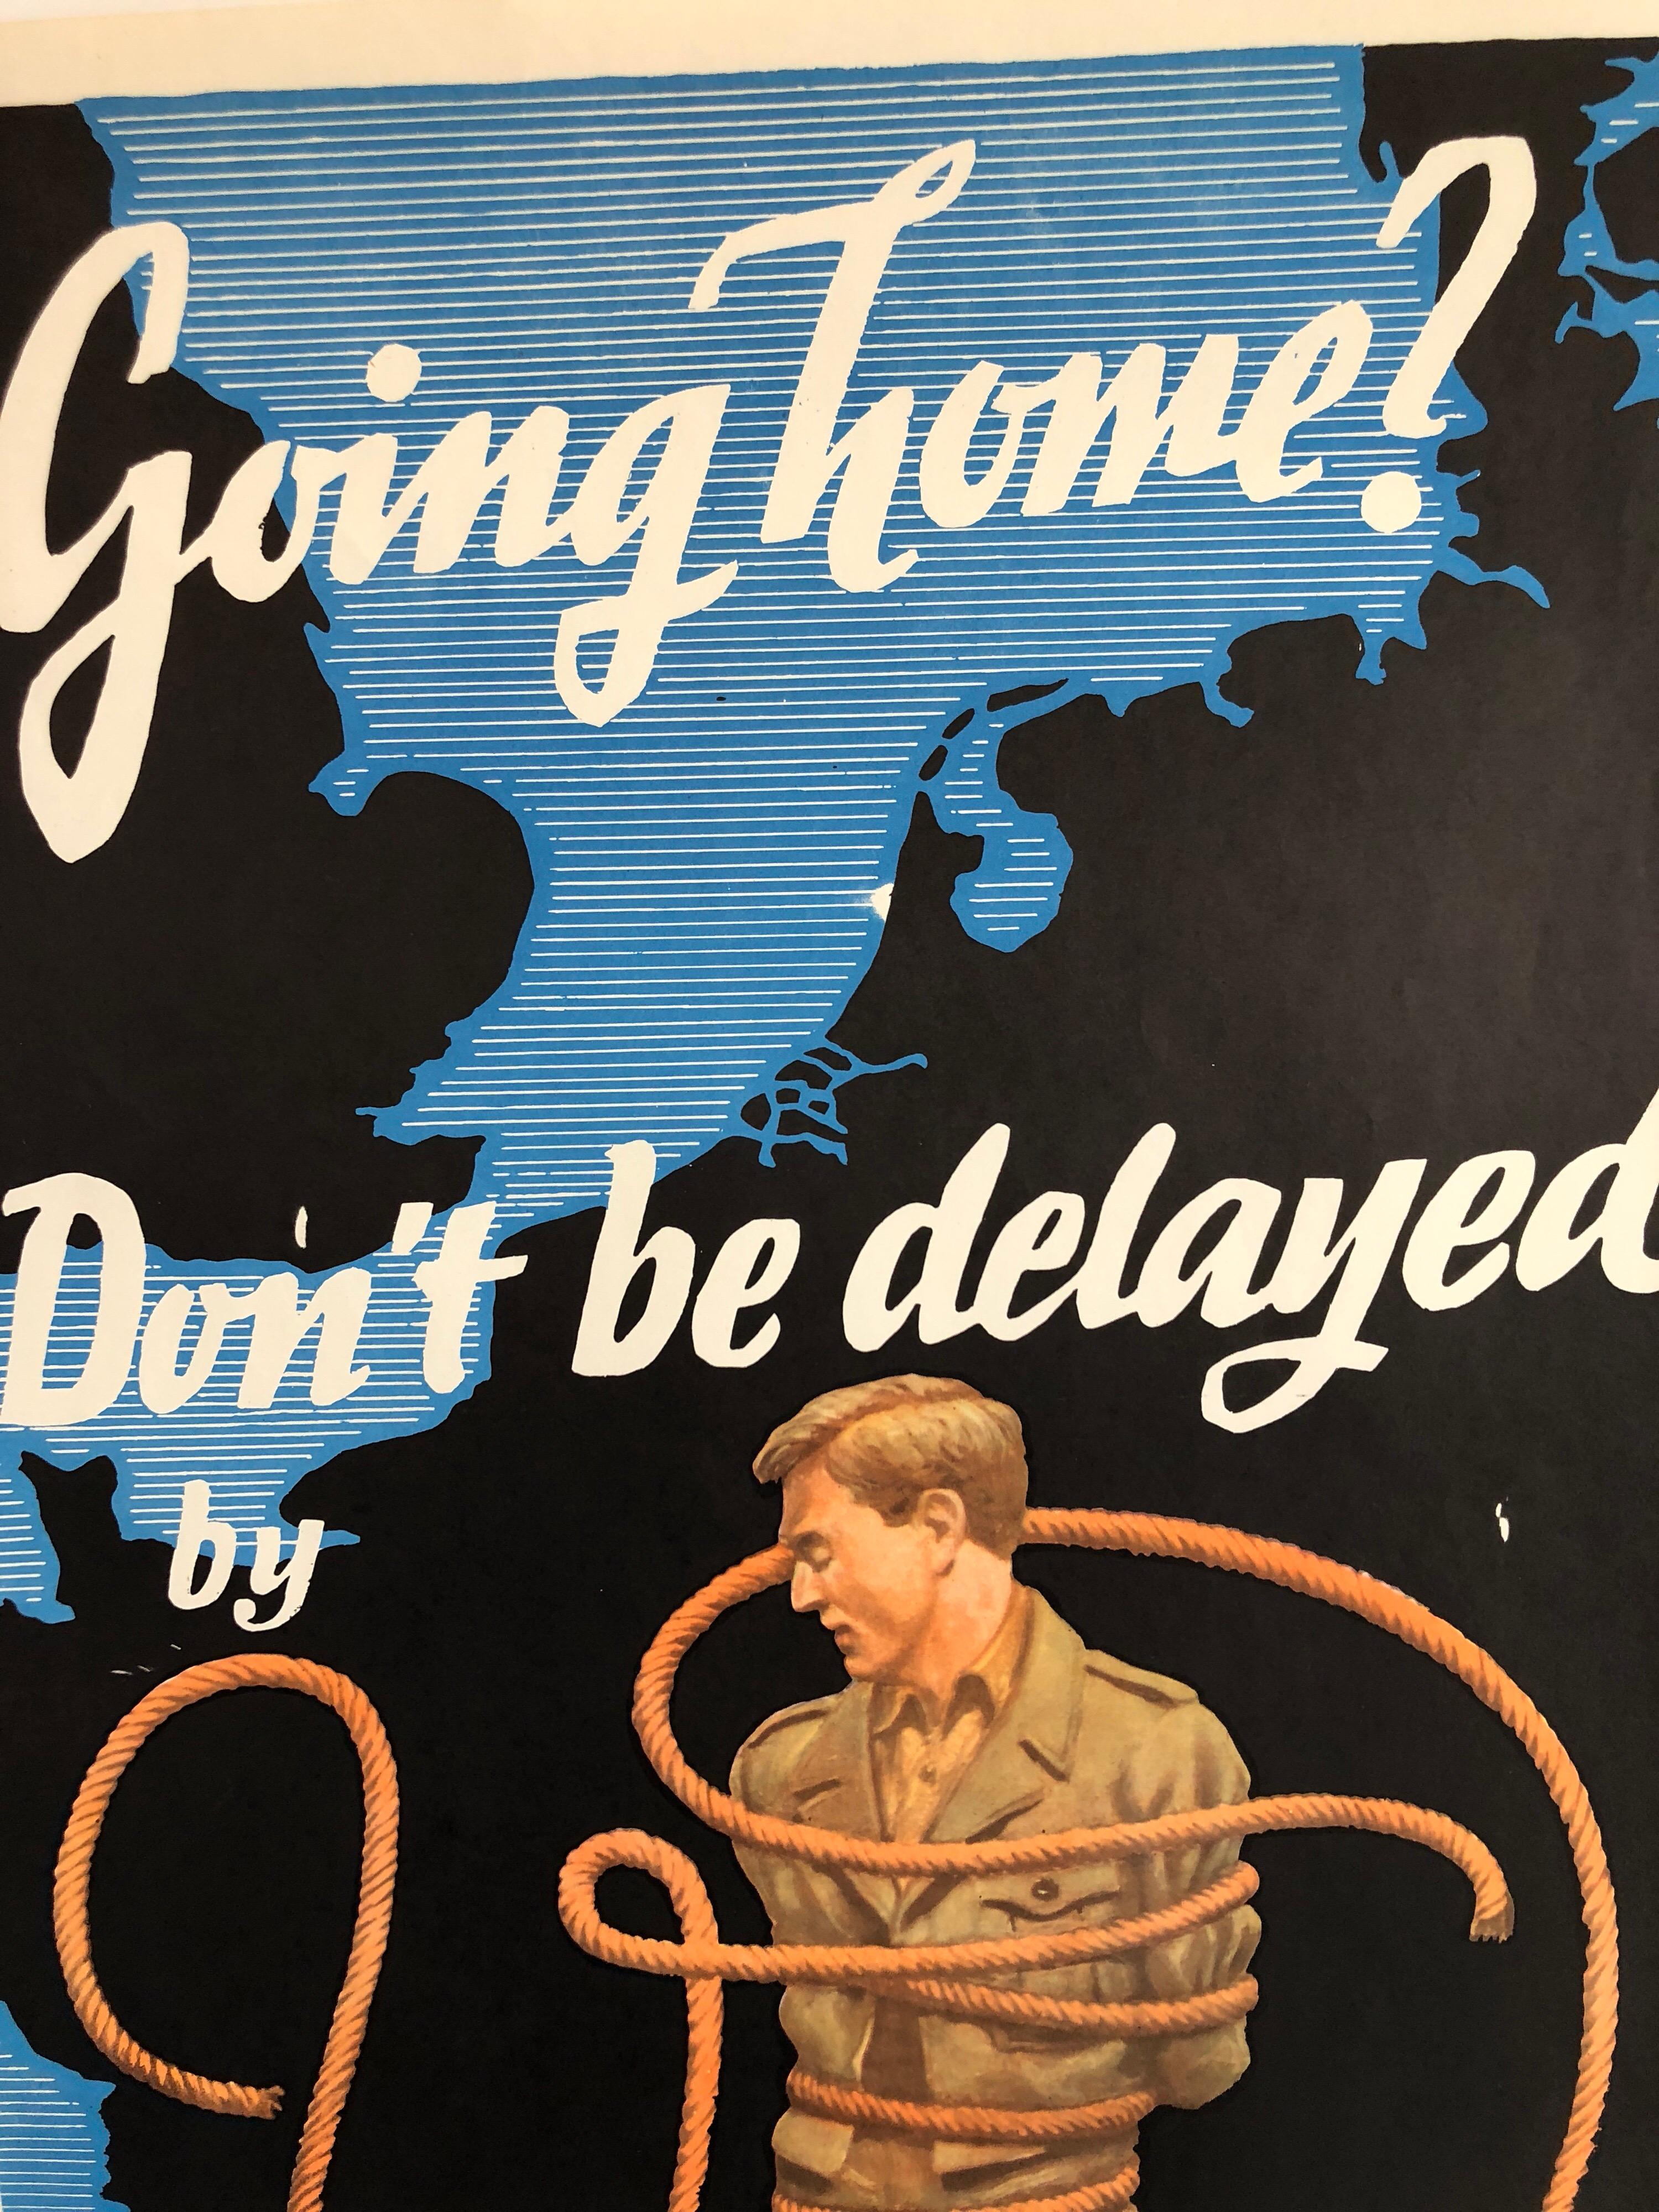  Going home? Don't be delayed by V.D.; 1946 military poster by Franz Oswald Schiffers. 
Going home? Don't be delayed by V.D. VD, the 1946 U.S. (or Australian) World War II (WWII) health poster warning soldiers overseas of the consequences of